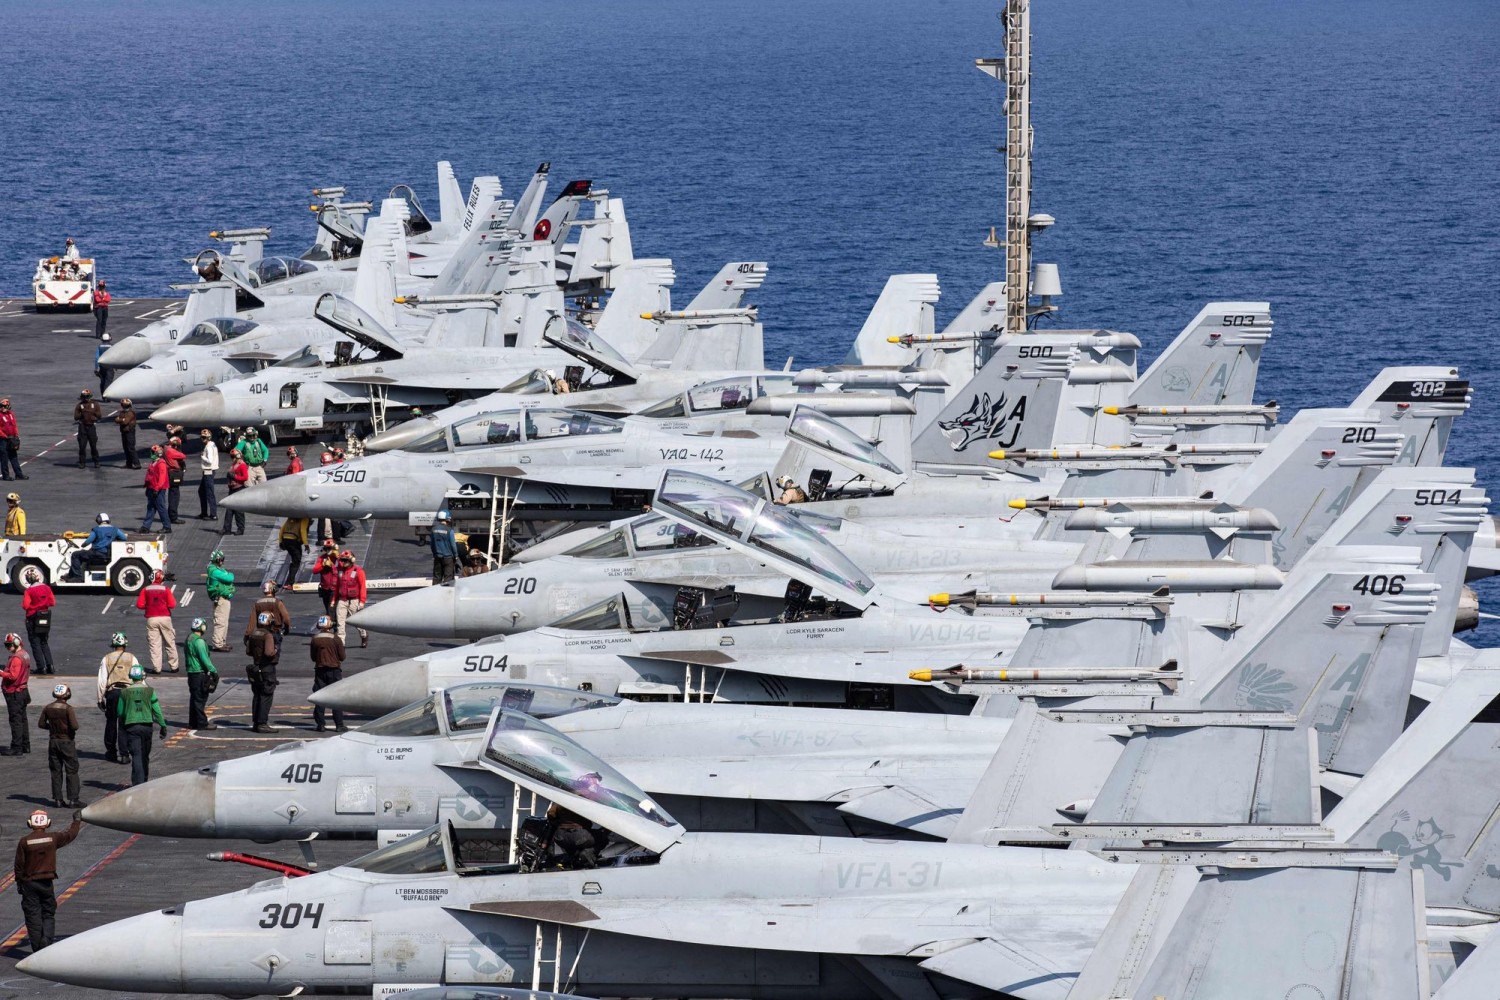 Flight operations are prepared on the USS Gerald R. Ford’s flight deck in the Eastern Mediterranean Sea. US NAVY/AGENCE FRANCE-PRESSE/GETTY IMAGES